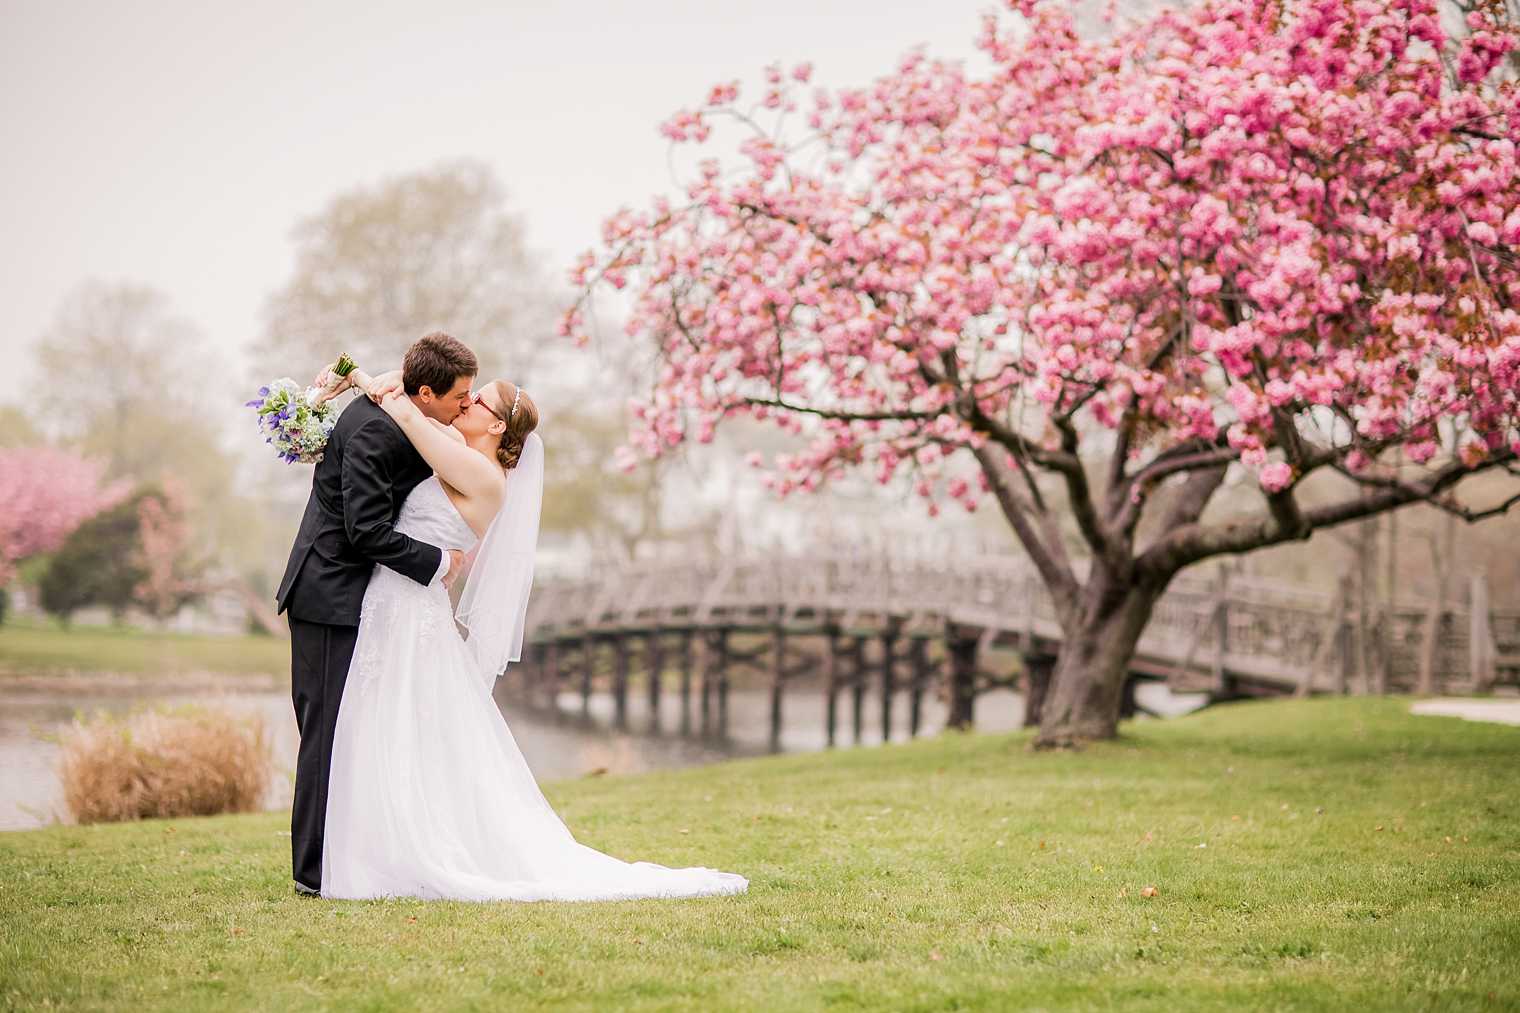 Spring Lake NJ wedding photo with cherry blossoms